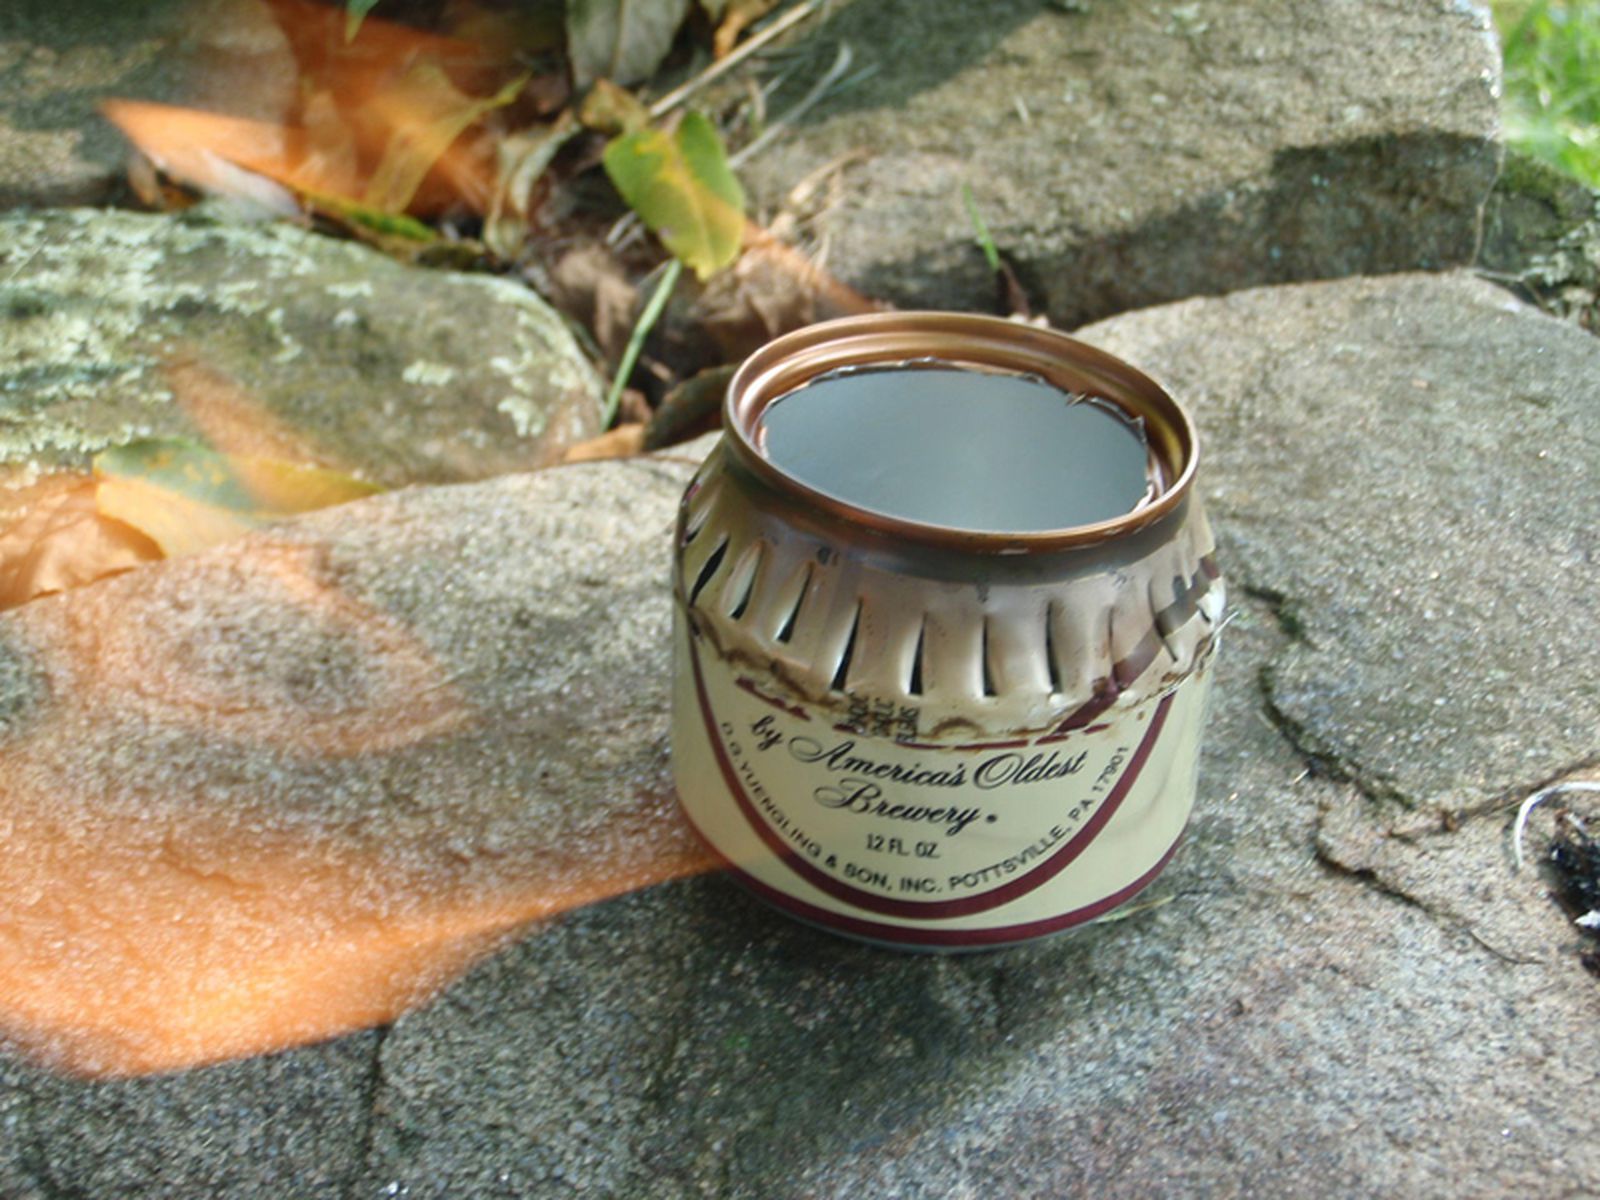 A lighted beer can emergency stove.